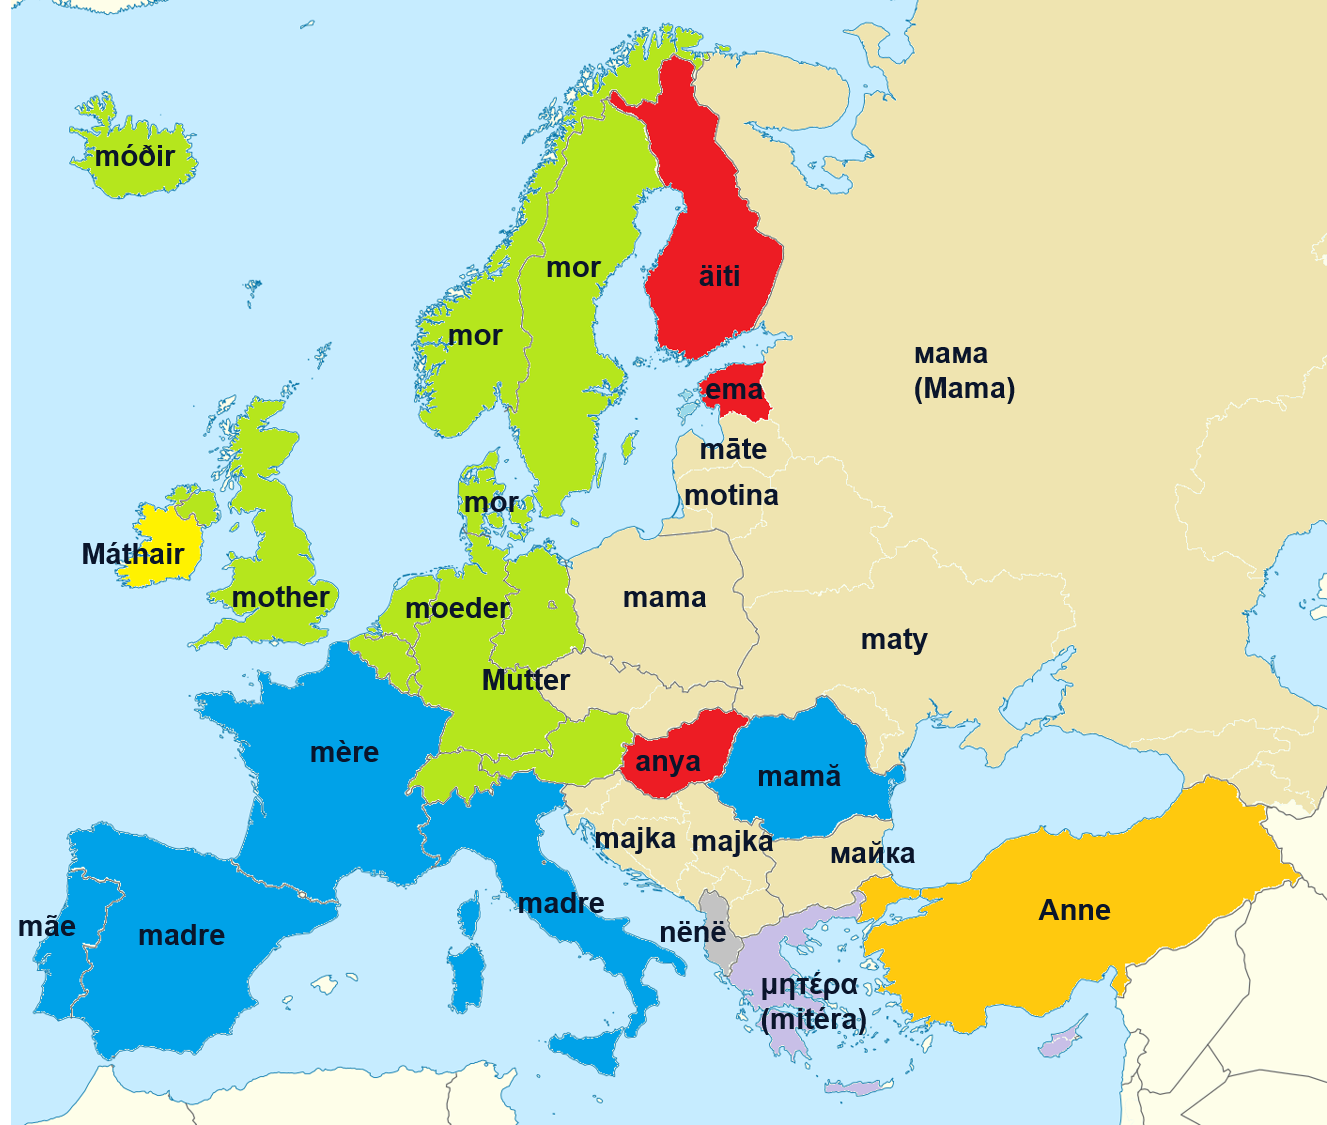 A map of european nations each divided by their respective borders, and matched with the word “mother” as it exists within each nation’s language. Colours are used to group similar sounding pronunciations of the word.